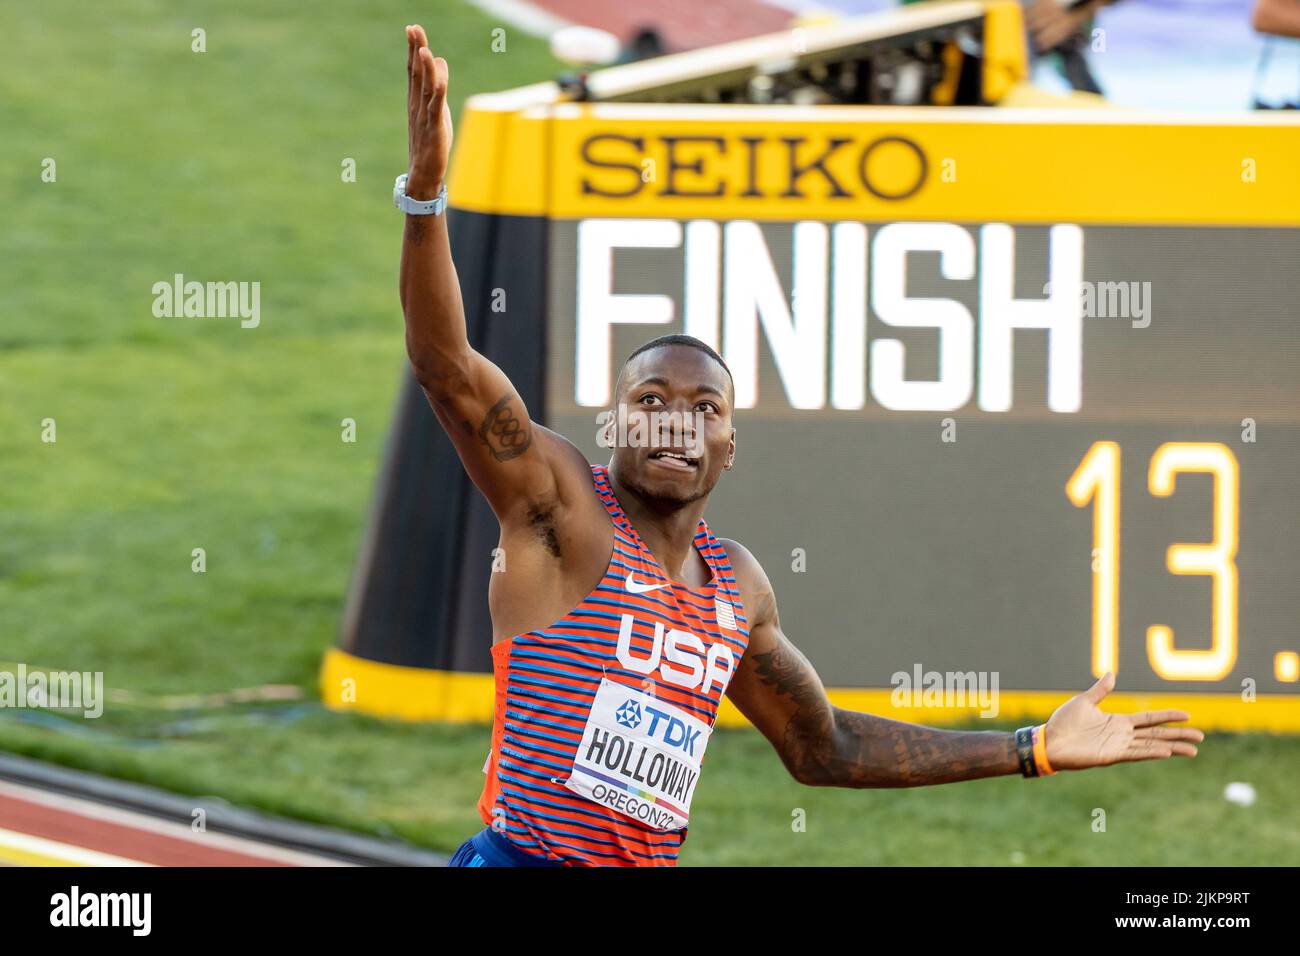 Grant Holloway (USA) celebrates becoming world champion in the 110 meter hurdles in a time of 13.03 during the afternoon session on day 3 of the World Stock Photo